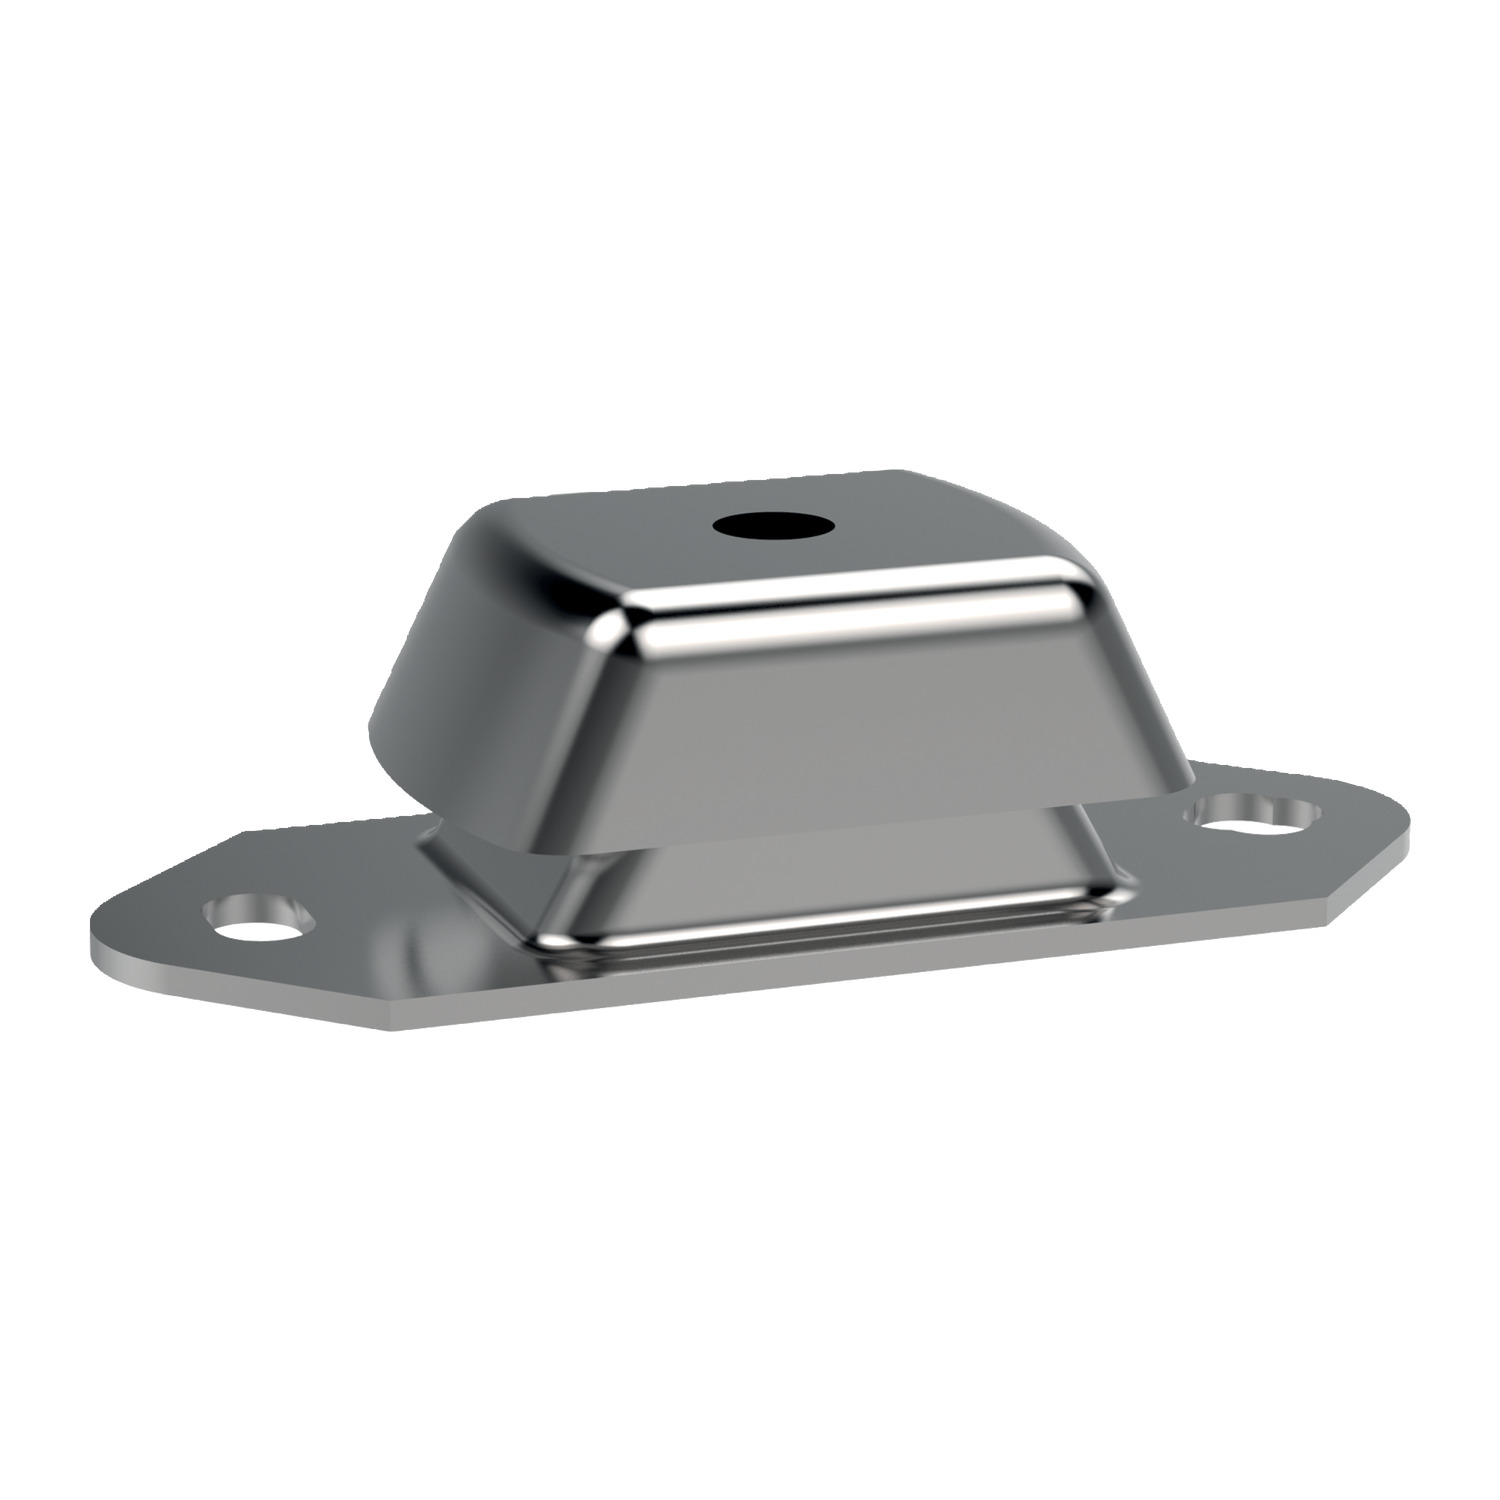 Anti-vibration Fail-Safe Mounts steel Anti-vibration mounts designed to control vibration across three axes with a mechanical fail-safe stop. Made from silver zinc plated steel and rubber.